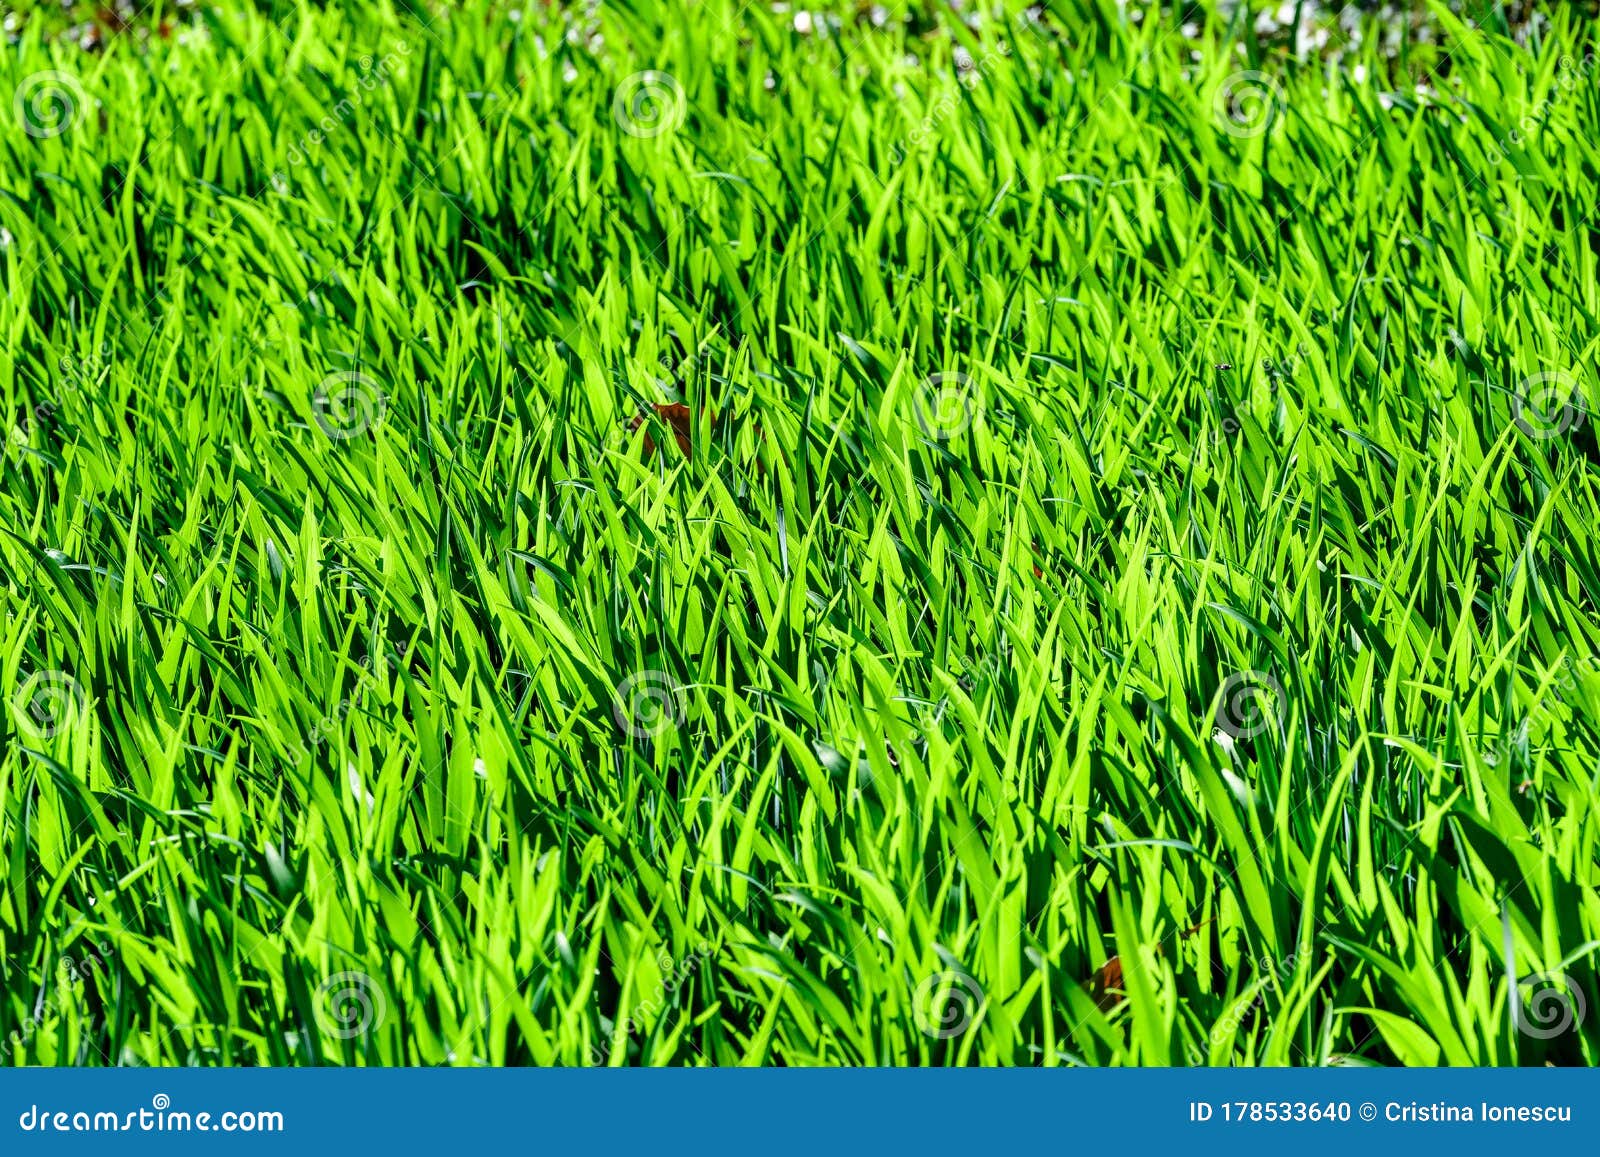 Background of Vivid Fresh Green Grass Leaves in an Organic Garden, in a